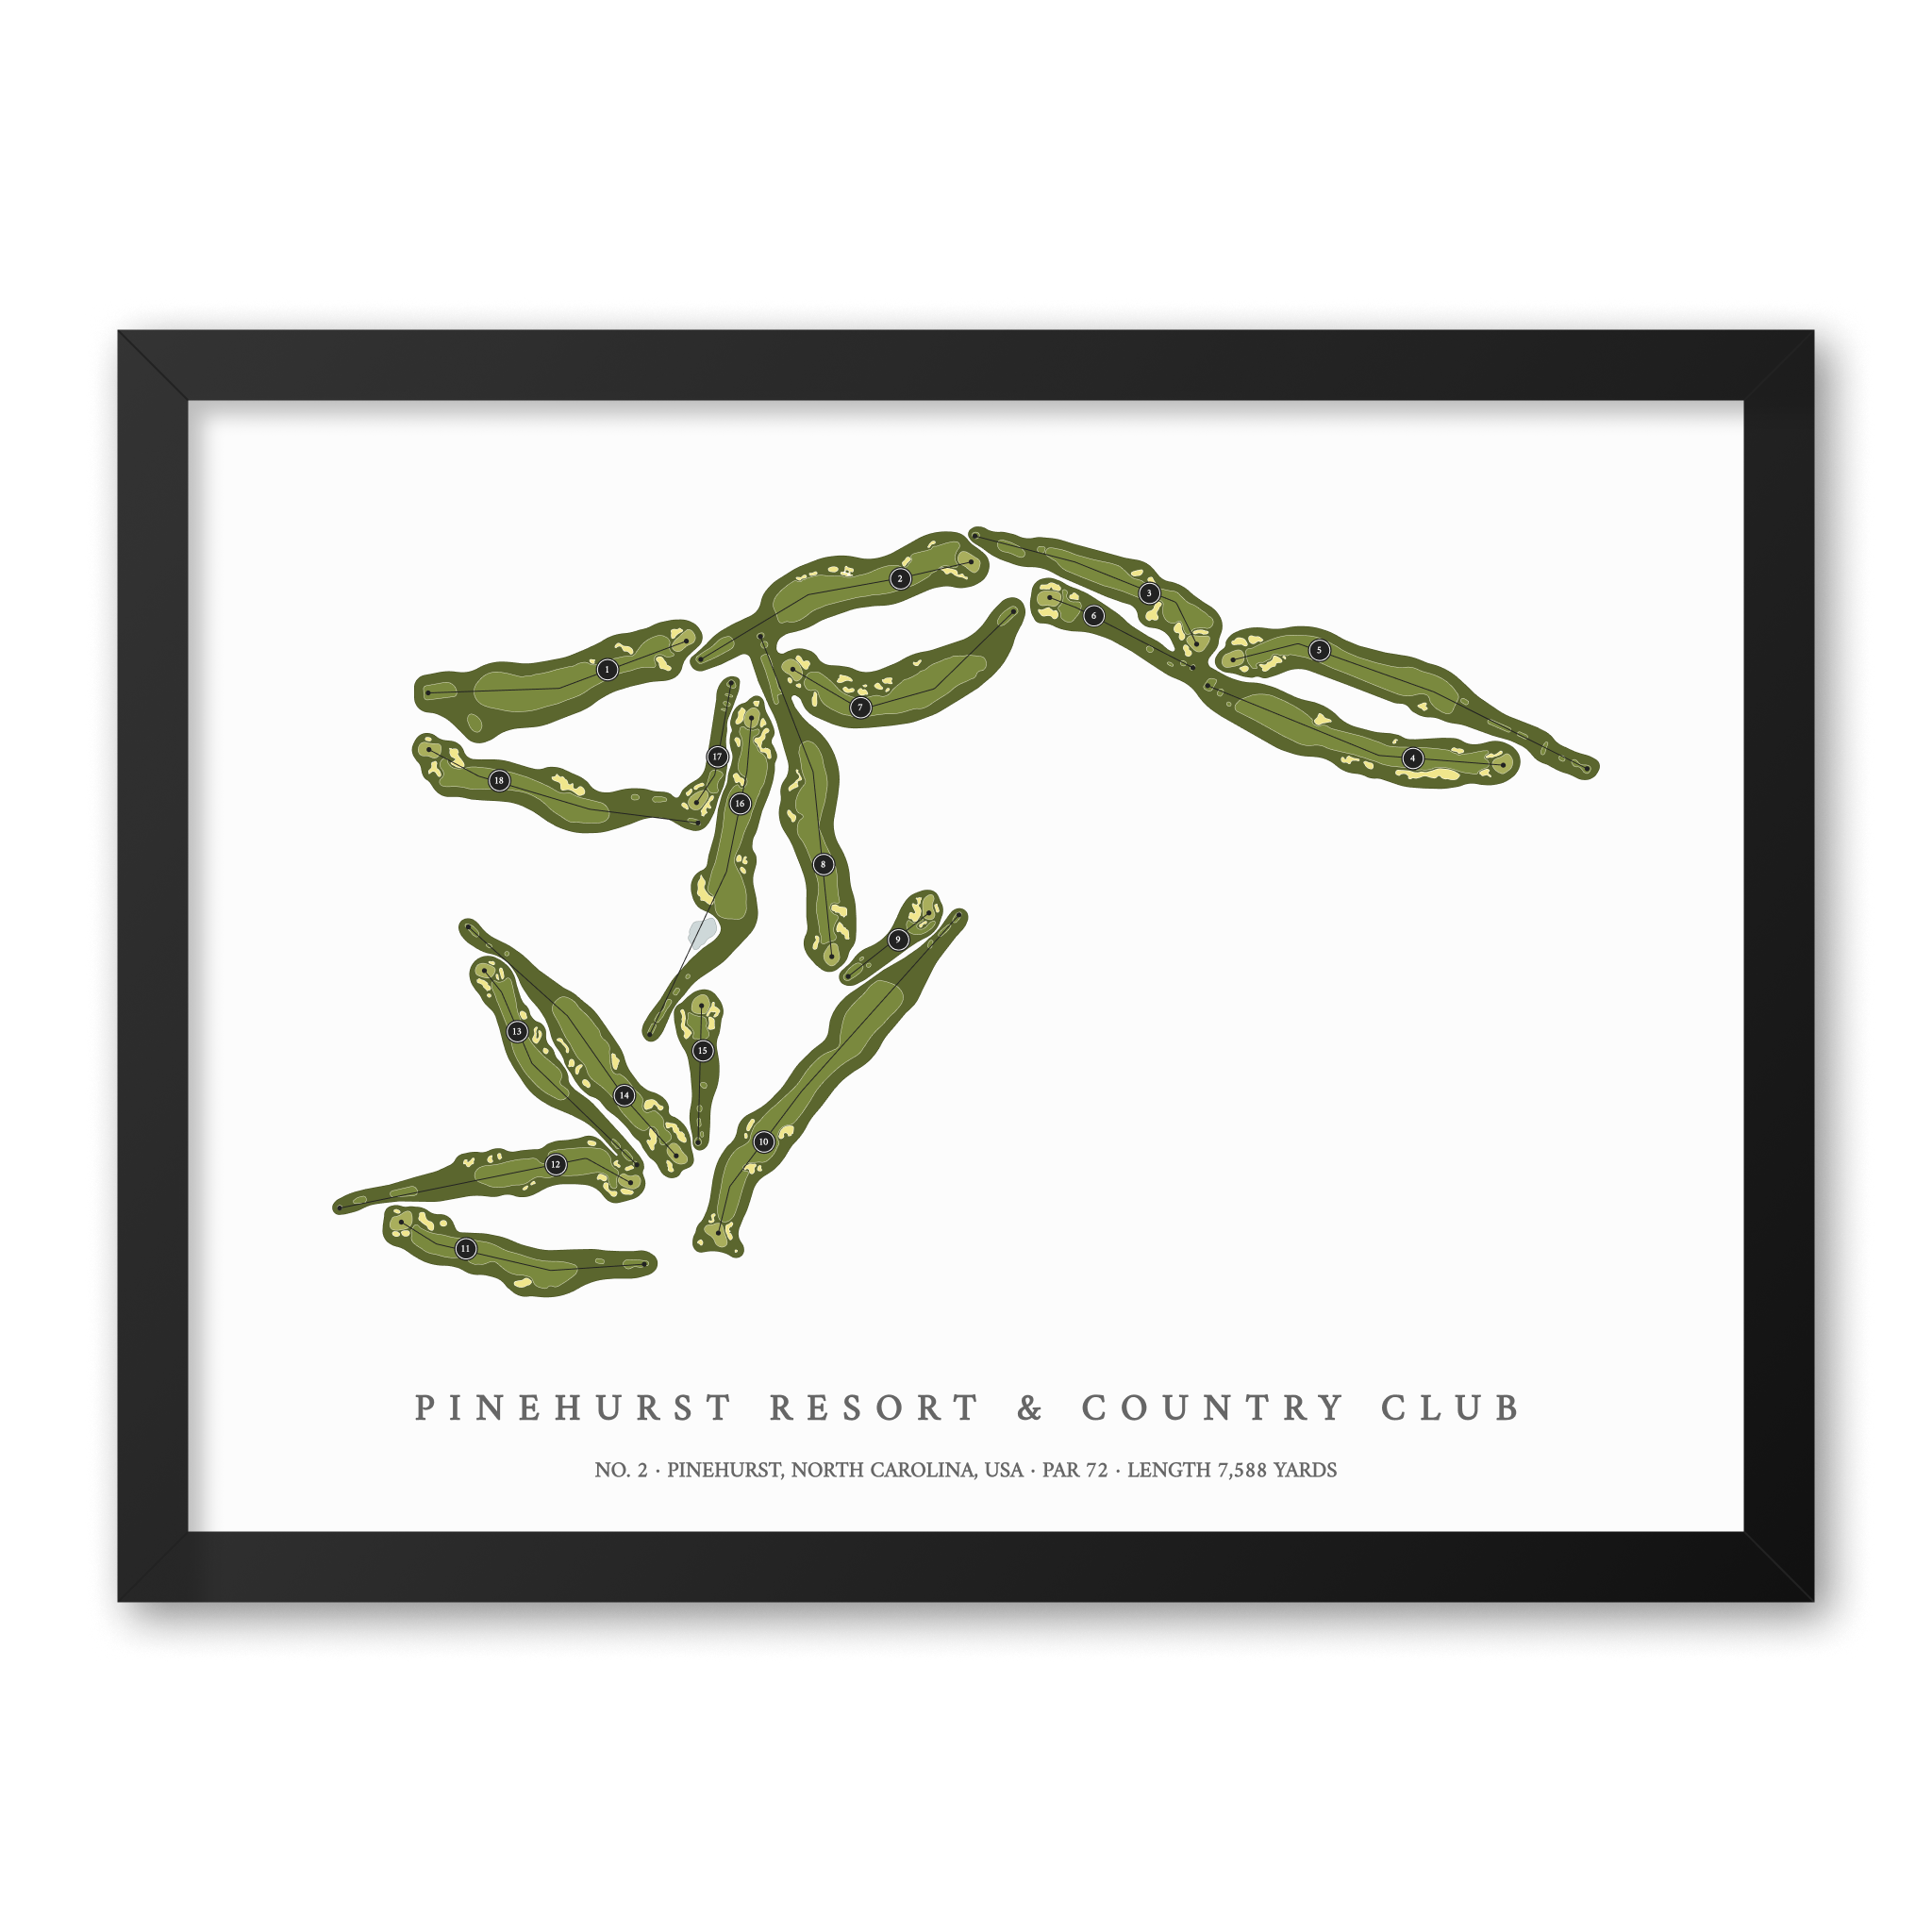 Pinehurst Resort & Country Club - No. 2| Golf Course Print | Black Frame With Hole Numbers #hole numbers_yes